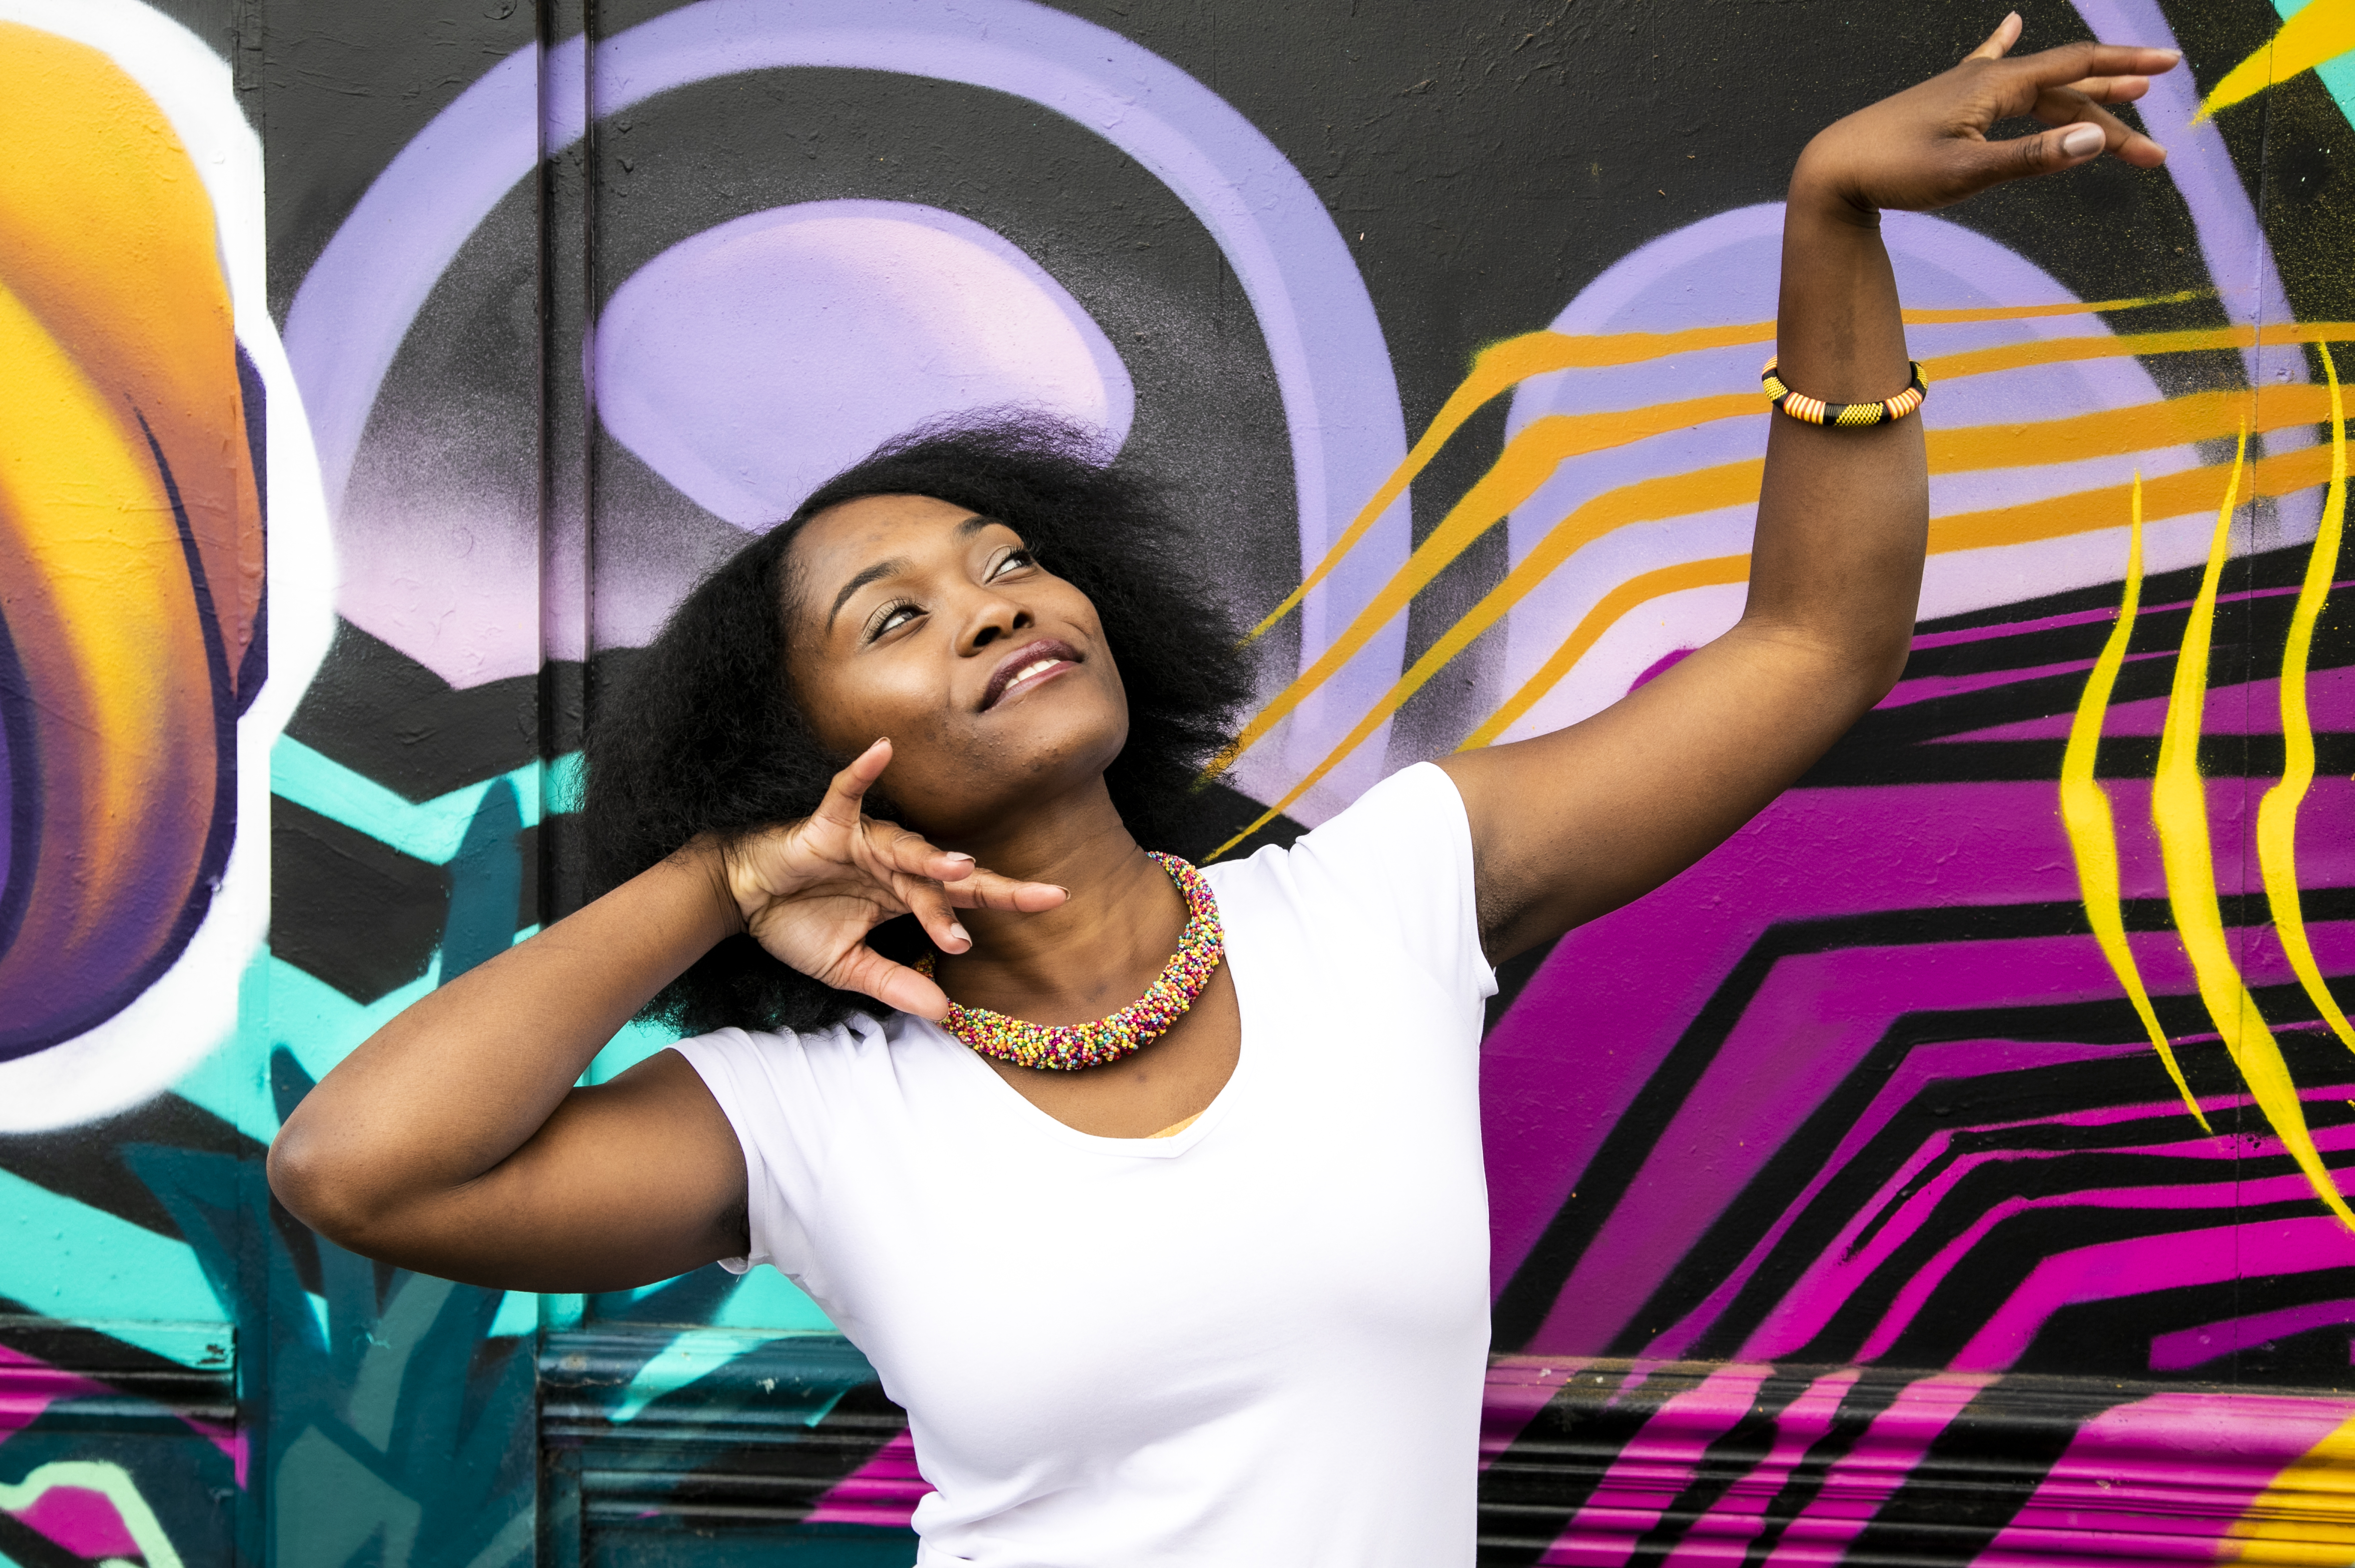 Global majority female dancer with afro, holding one arm out to the top right of the image with eyes looking at a limp wrist and the other hand next to her face. Wearing white top and colourful beaded necklace in fornt of coloured graffiti wall